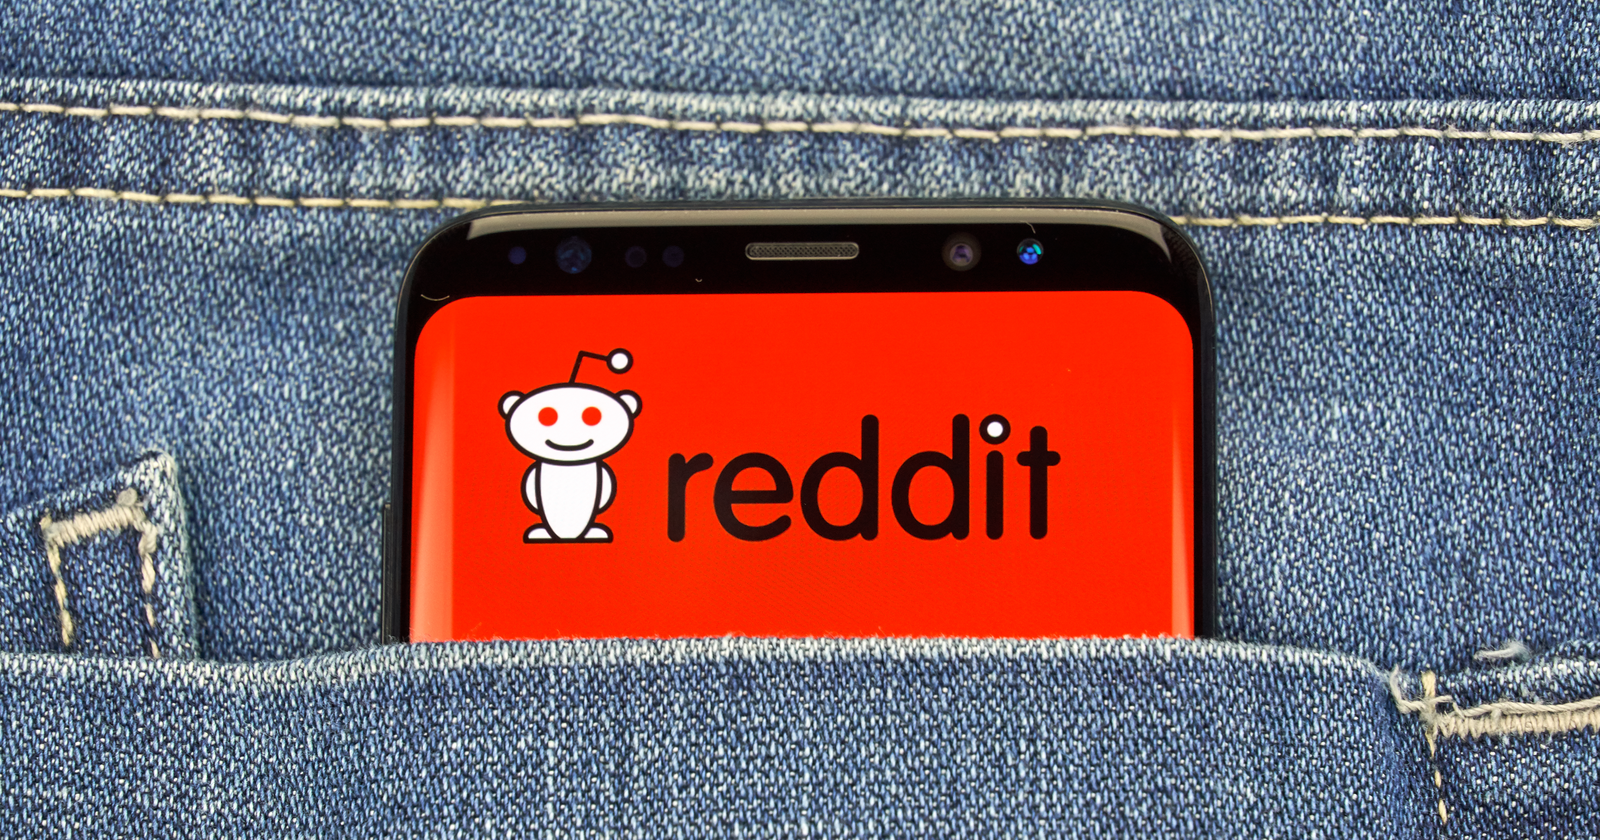 What the Most Viral Reddit Images Can Teach Marketers